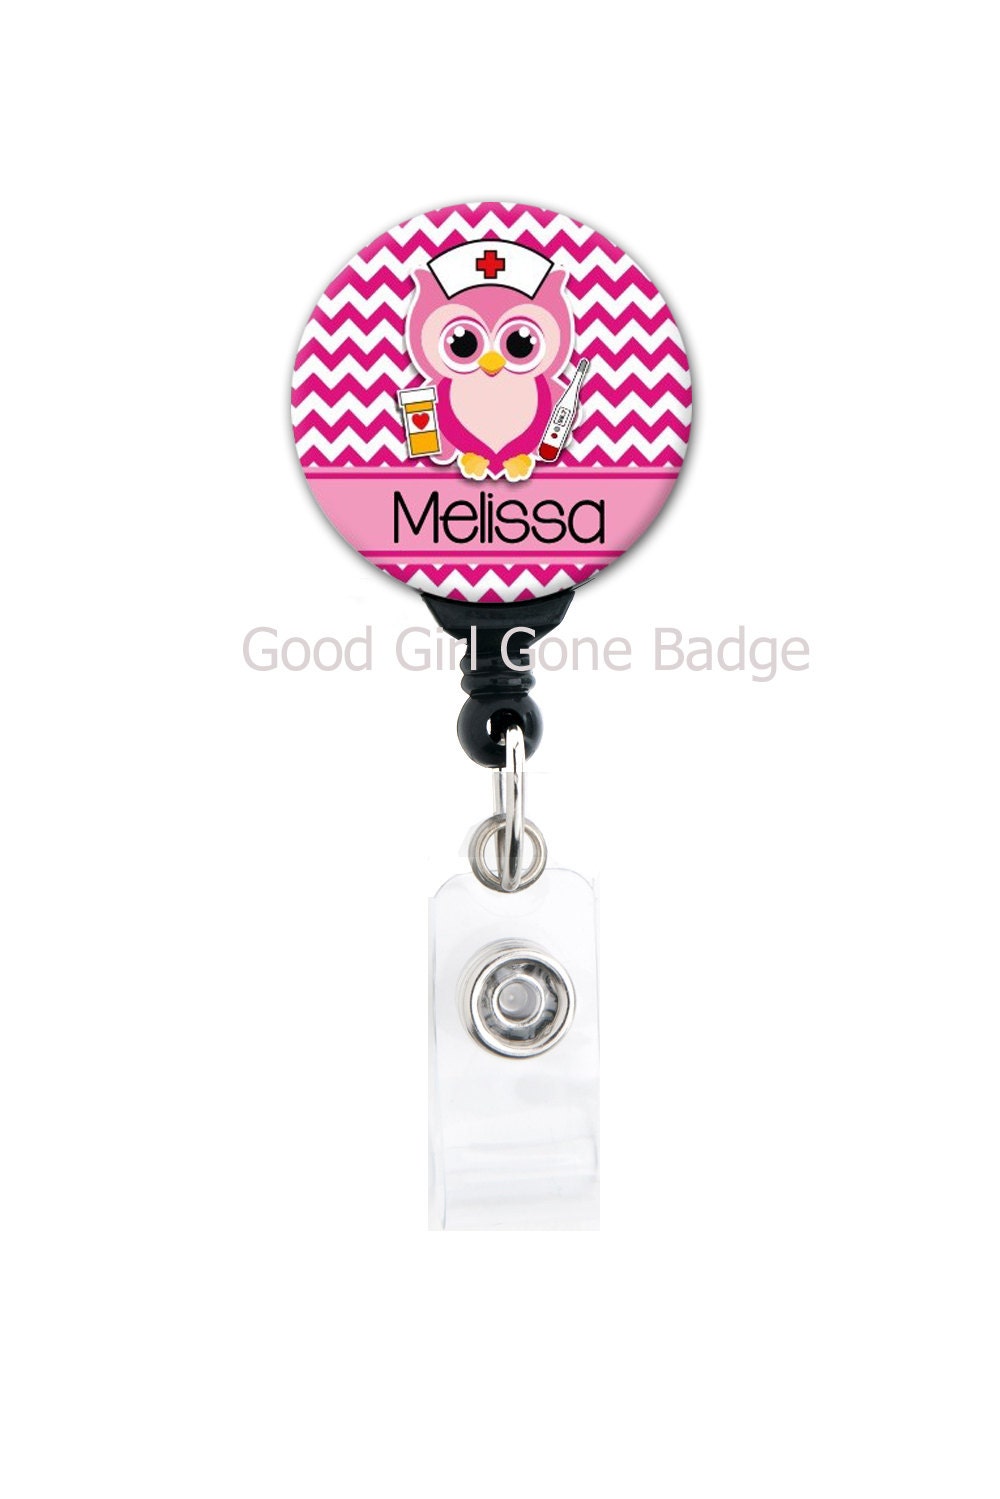 Badge Reel Accessory / Mini Pen, Permanent Marker, Highlighter, LED Light  Your Choice Attach to Your Badge Holder, Belt Loop, Etc 